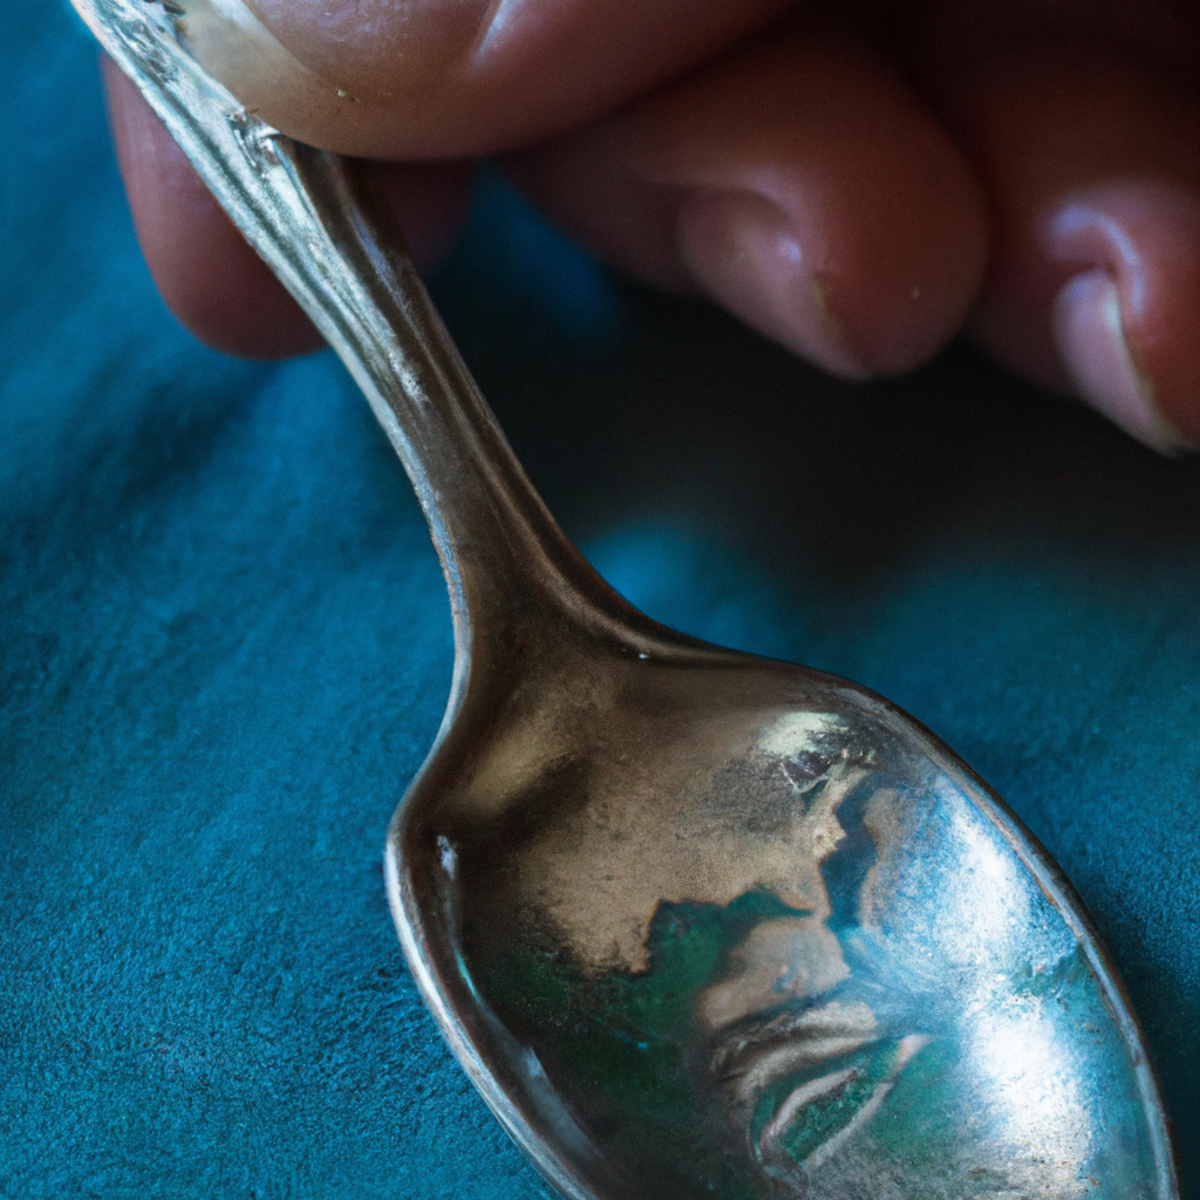 Tarnished silver spoon with bluish hue, showcasing argyria effects. Reflective surface emphasizes metallic texture and intricate patterns.